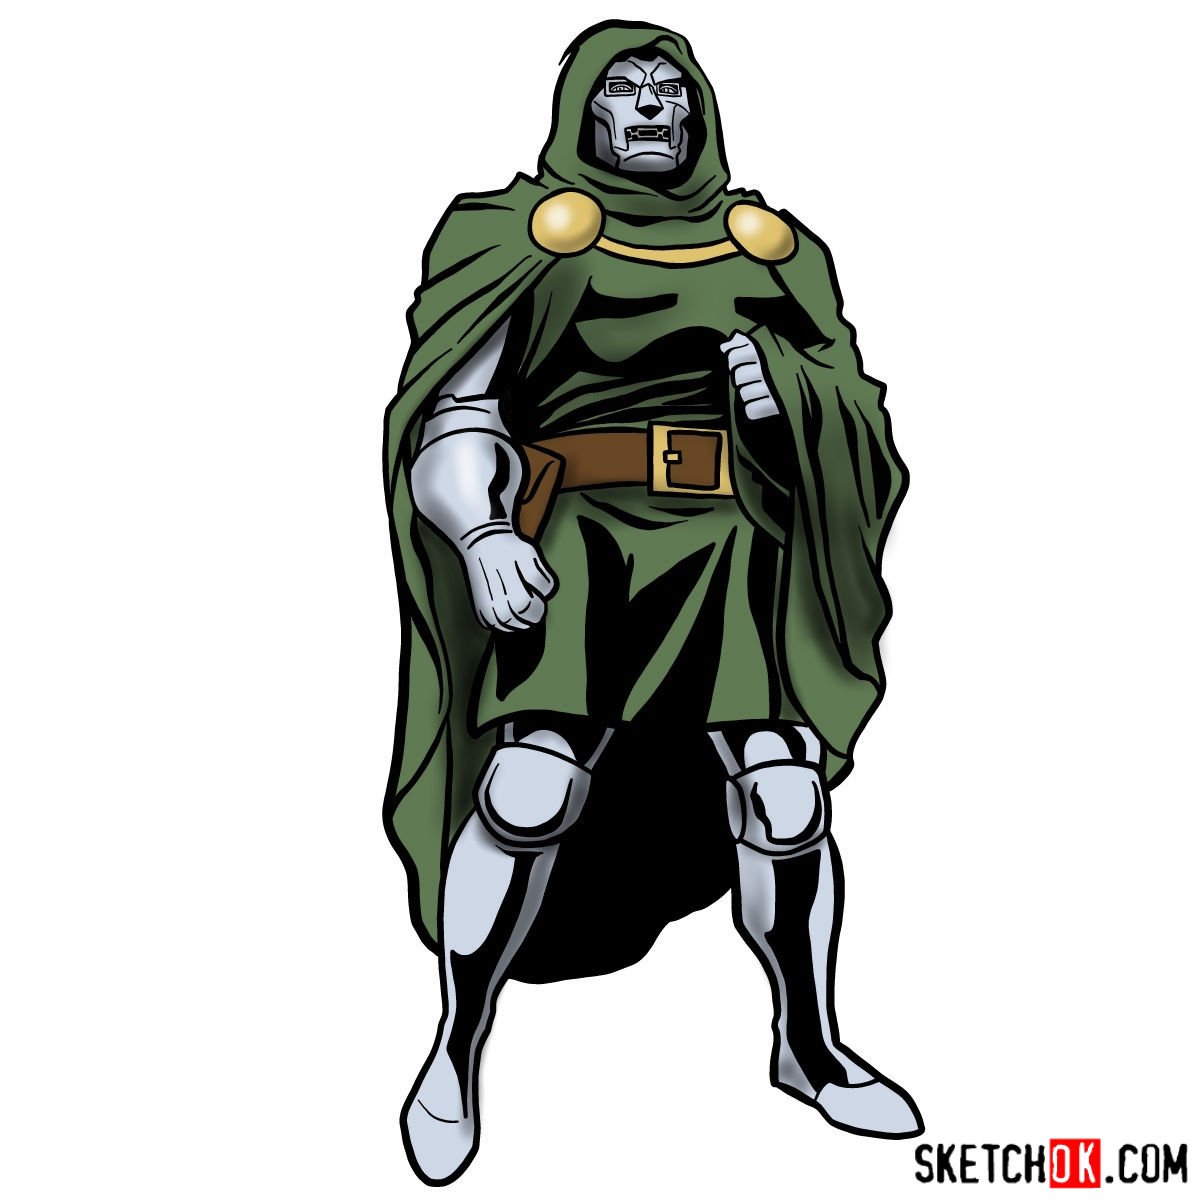 How to draw Doctor Doom, Marvel’s supervillain